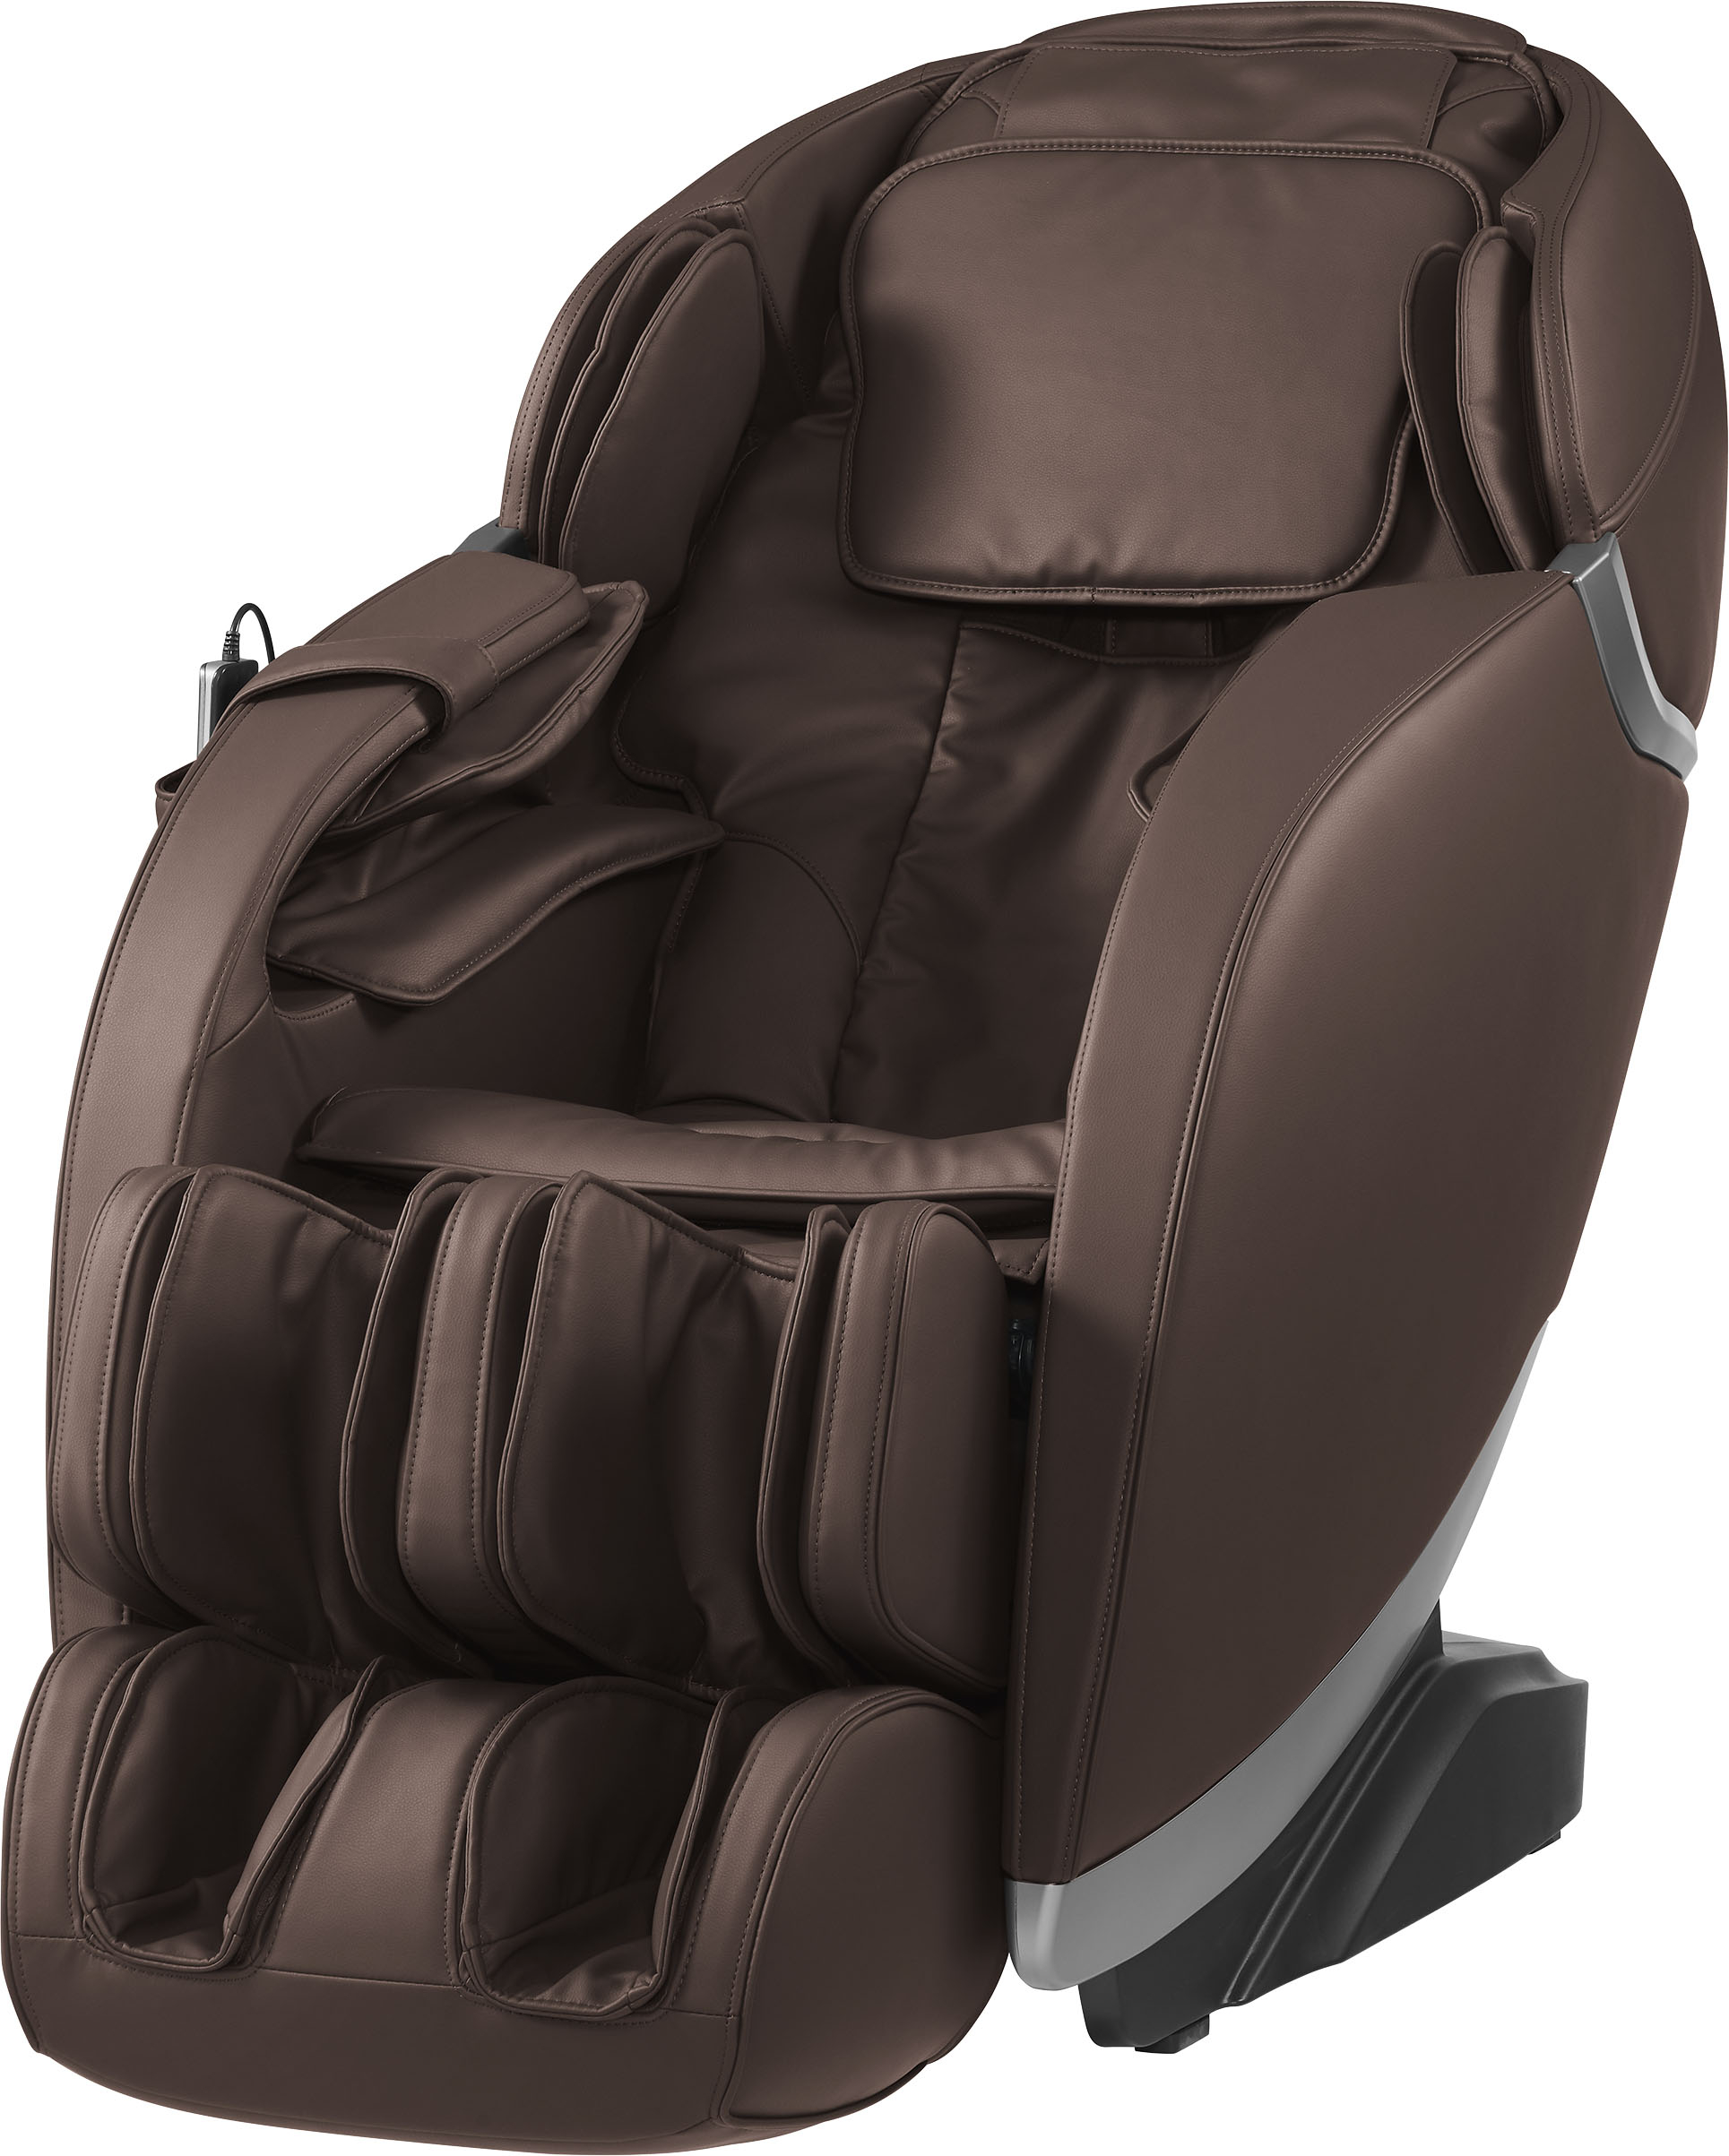 Left View: Insignia™ - 2D Zero Gravity Full Body Massage Chair - brown with silver trim